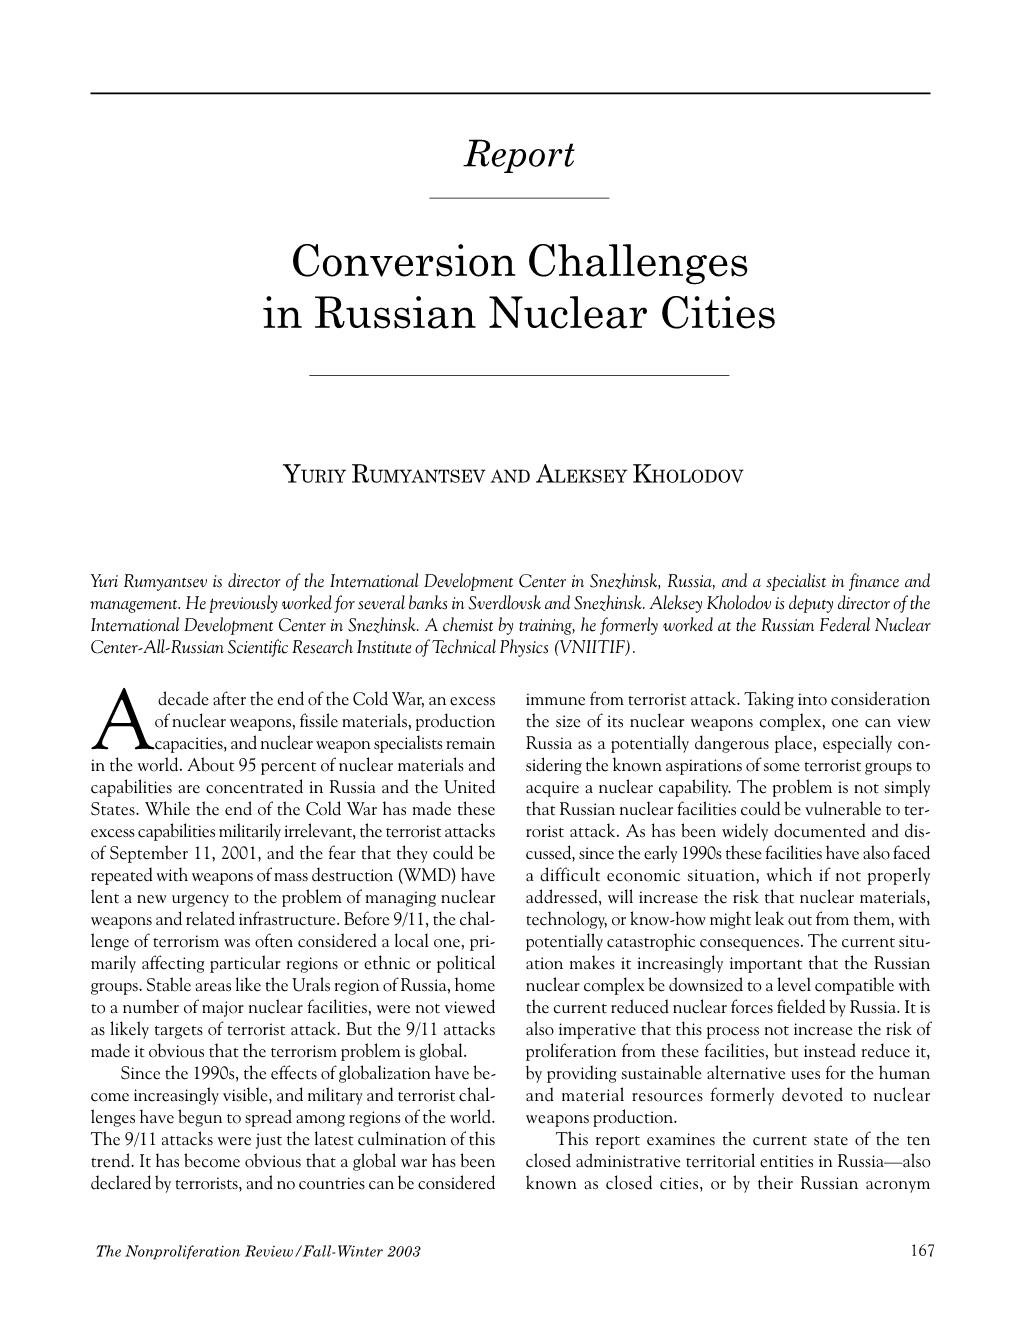 NPR10.3: Conversion Challenges in Russian Nuclear Cities